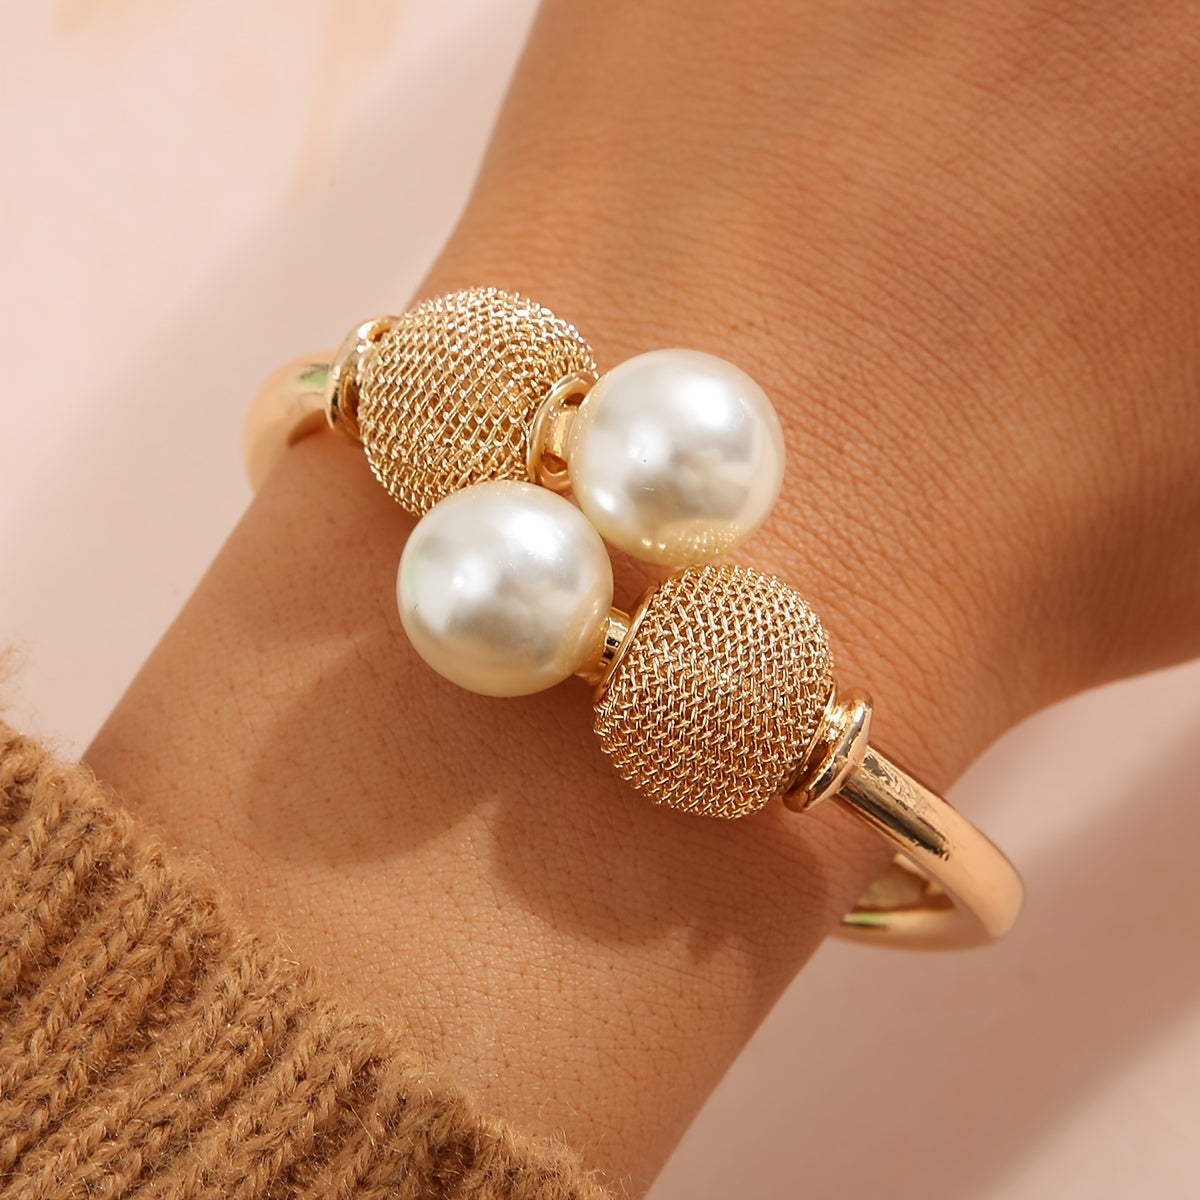 Make a Statement with our Exaggerated Alloy Open Bangle Bracelet Adorned with Large Faux Pearls